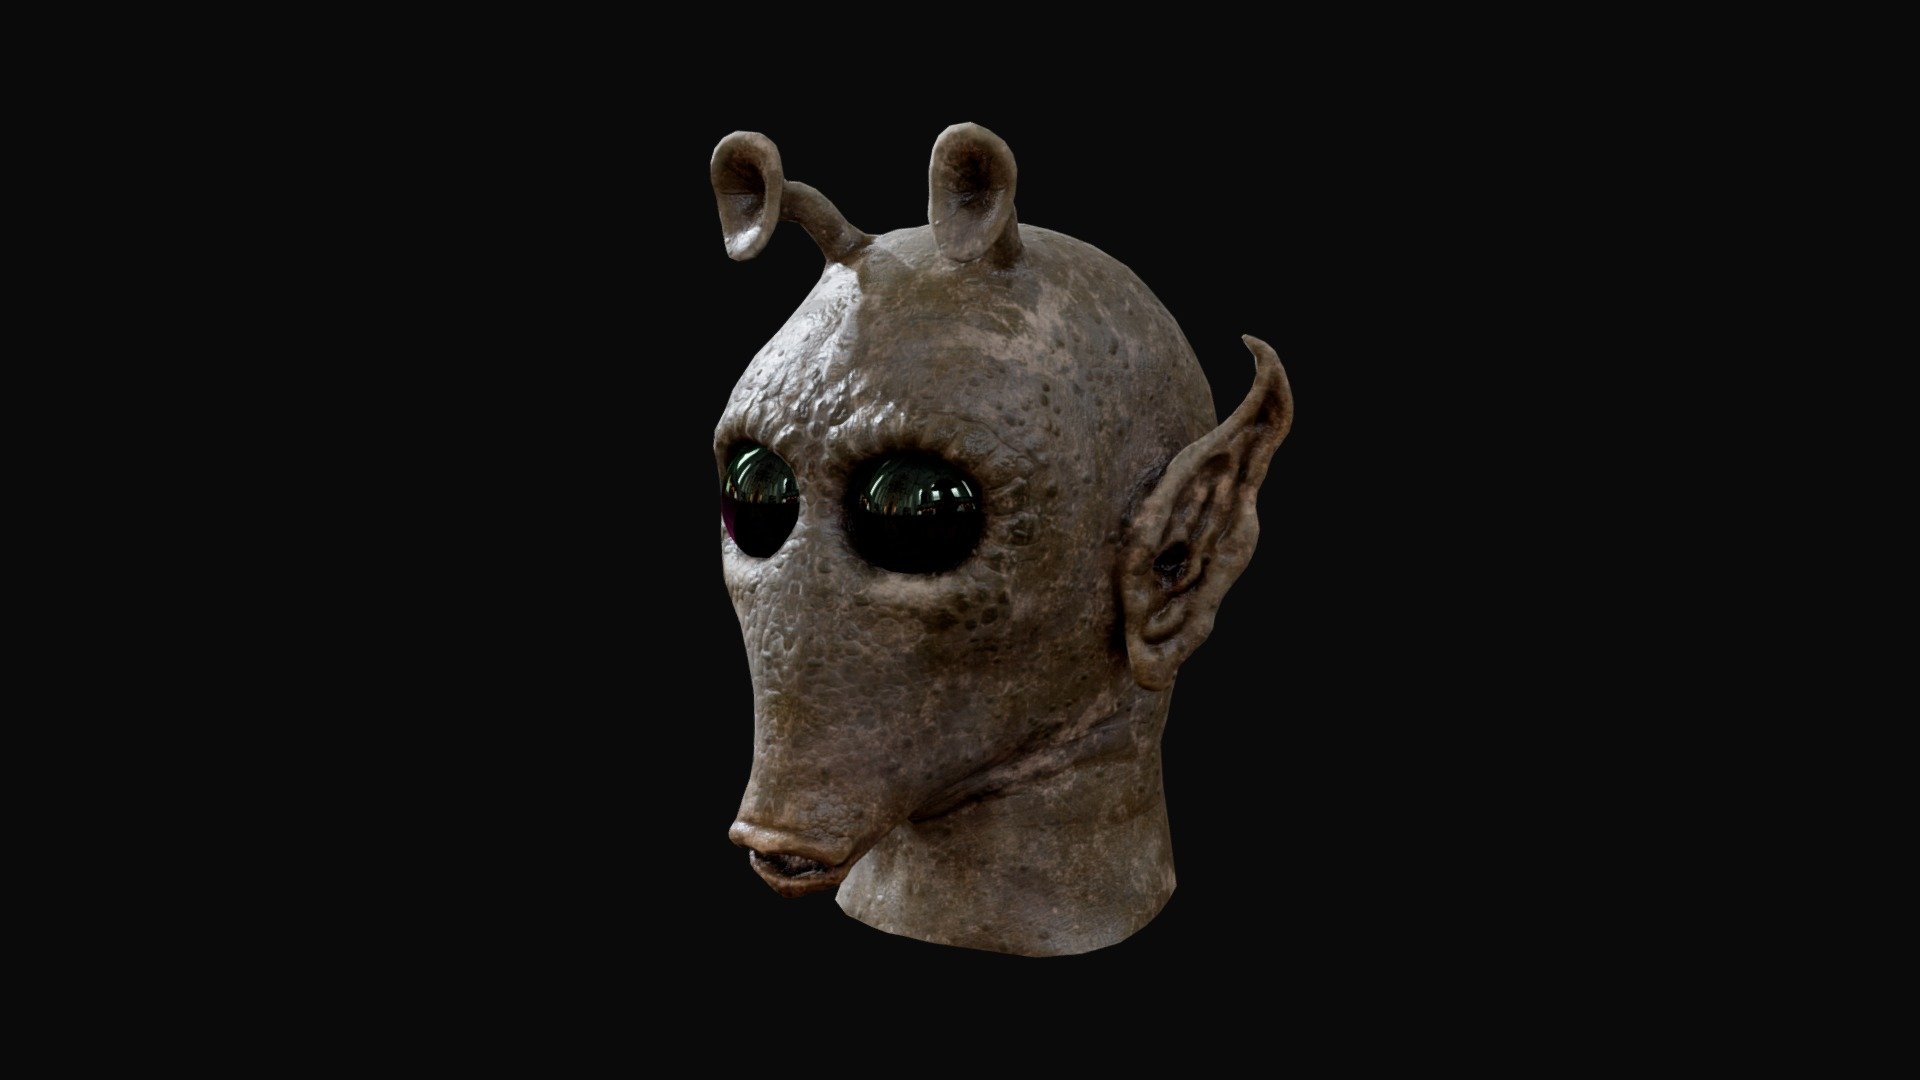 Sculpted in Blender, retopo in Maya, textured in Substance Painter. I wanted to make a Rodian character that wasn't an exact copy of Greedo. Very happy with the result!

Note: this model is not rigged, what you see in sketchfab is what you get. I recommend re-sizing and adding a bit of subsurface scattering to get just a touch of pink in the antenna, ears, and lips - here is an example render

(It does not have a mowhawk like Greedo, but a bald rodian shows up in Solo, The Mandalorian, and The Book of Boba Fett, so this design is still canon!) - Star Wars Rodian character Head - Buy Royalty Free 3D model by Robear (@xiaorobear) 3d model